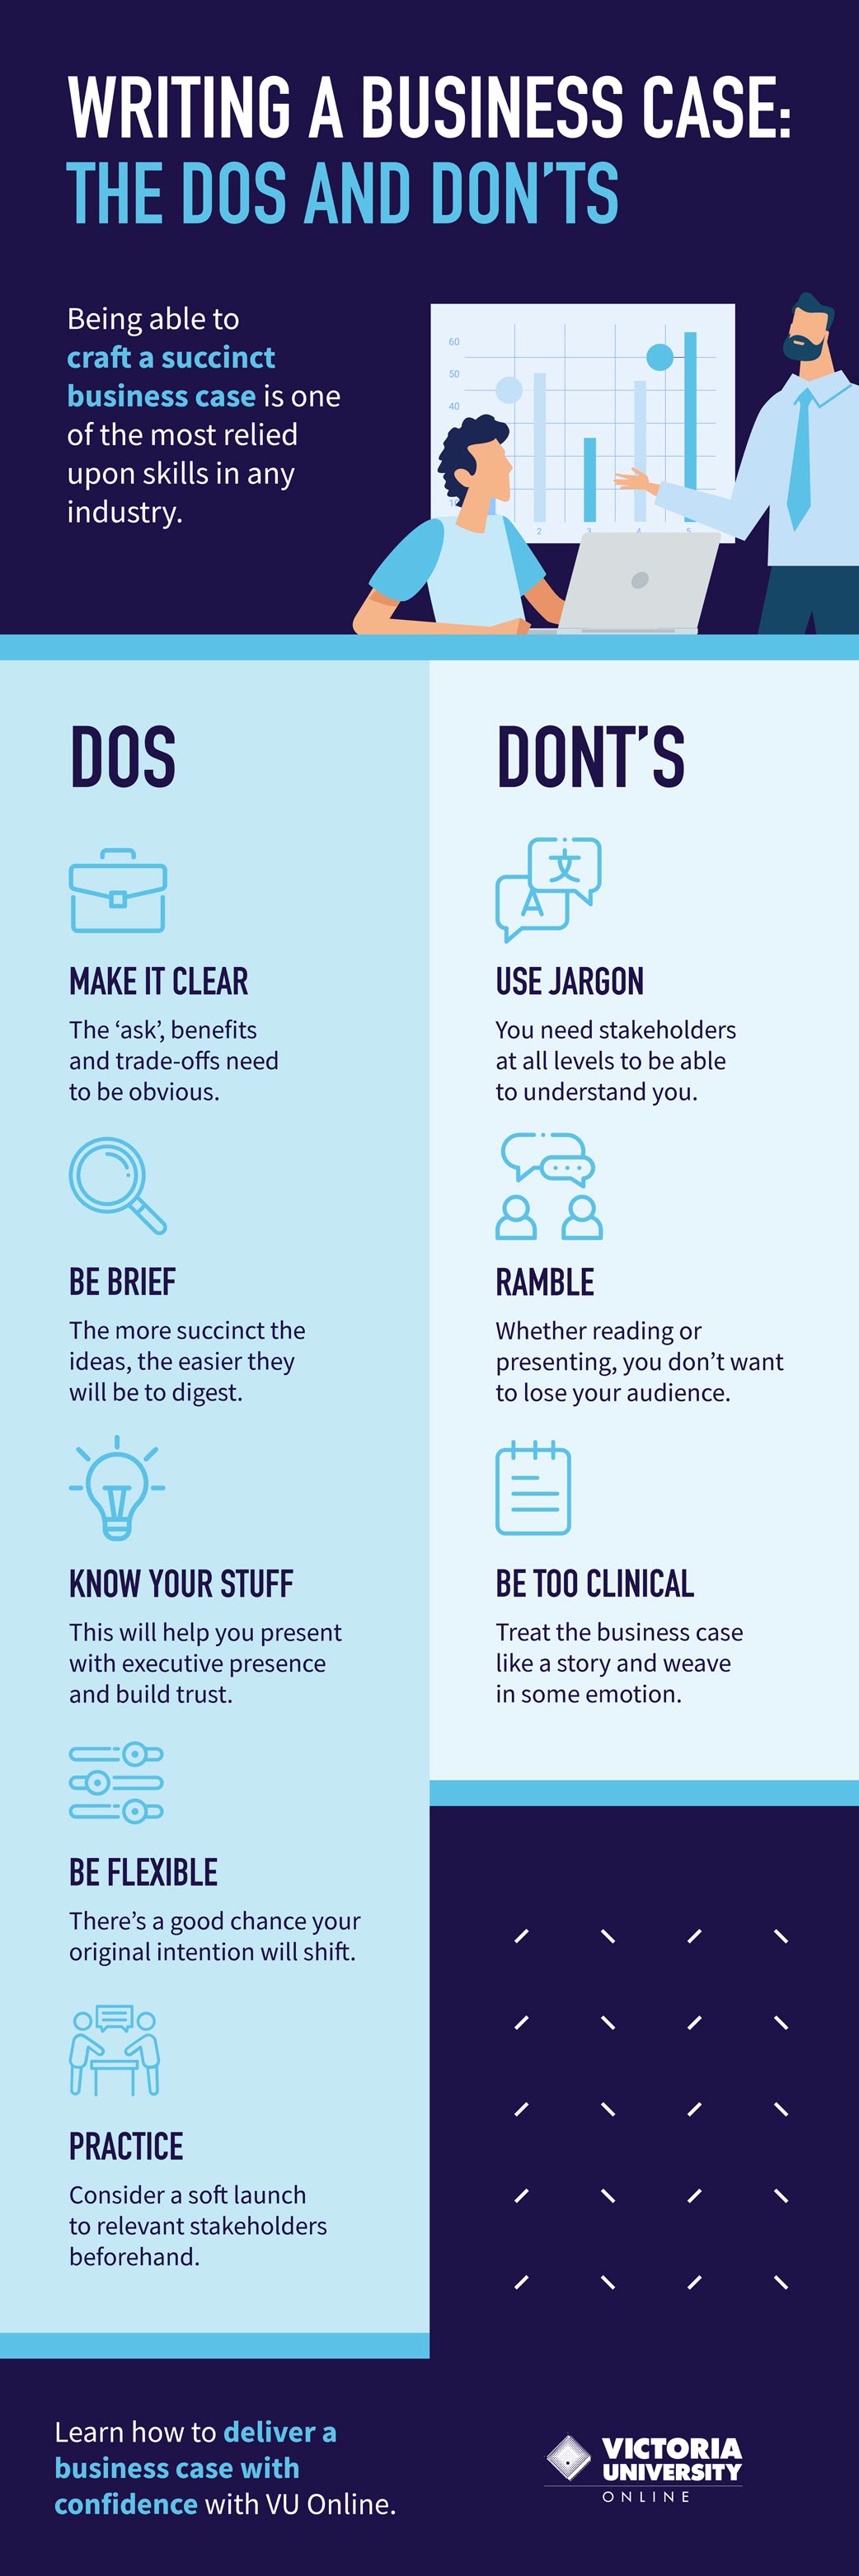 Infographic featuring the Dos and Don'ts of writing a business case.